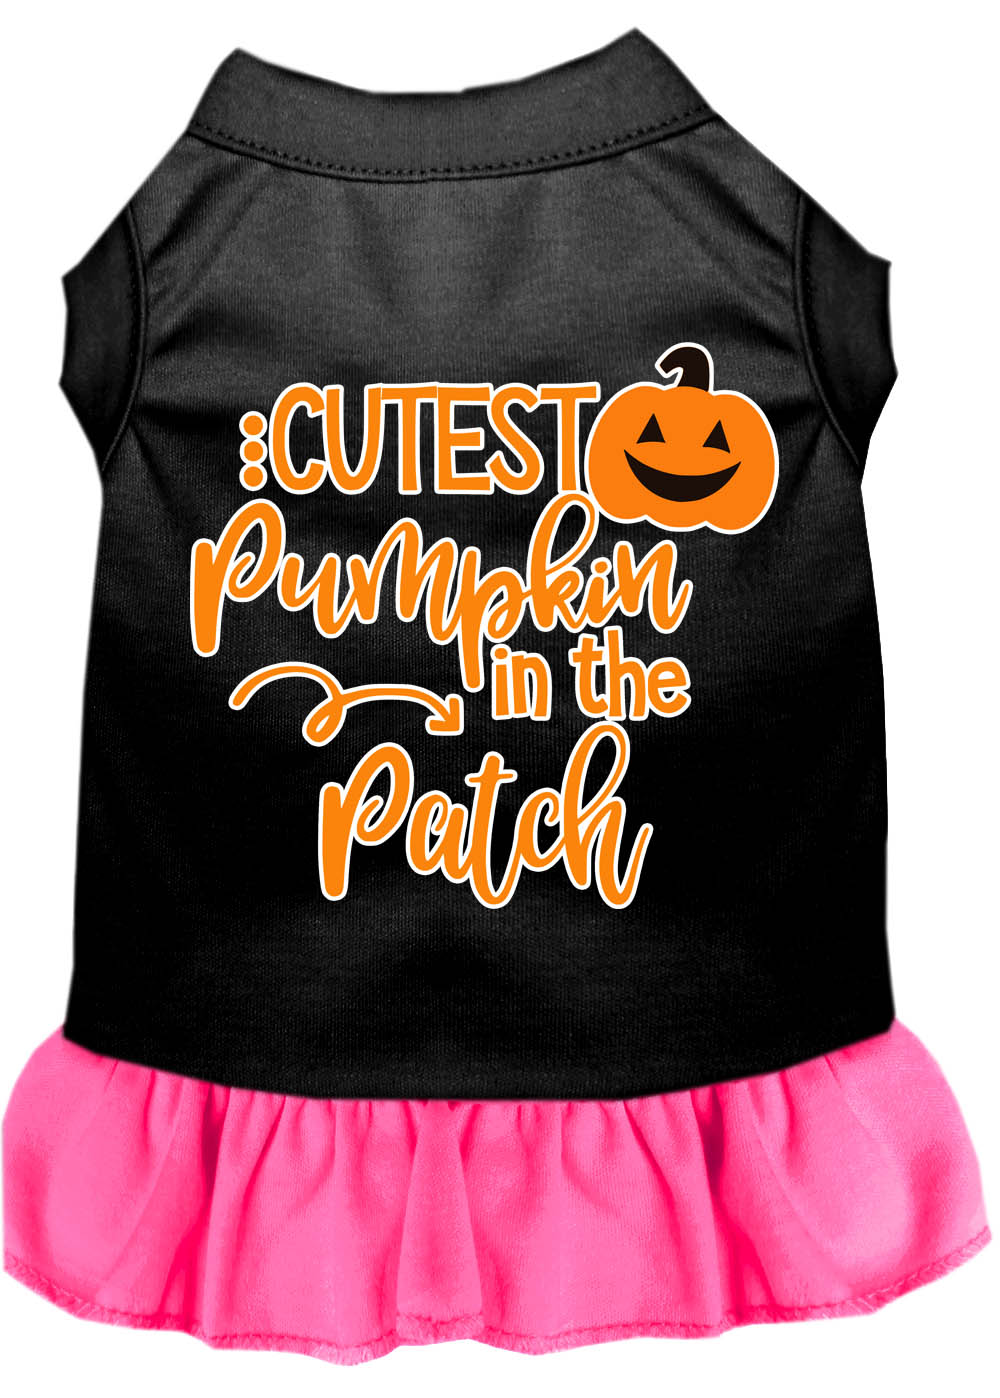 Cutest Pumpkin in the Patch Screen Print Dog Dress Black with Bright Pink Sm